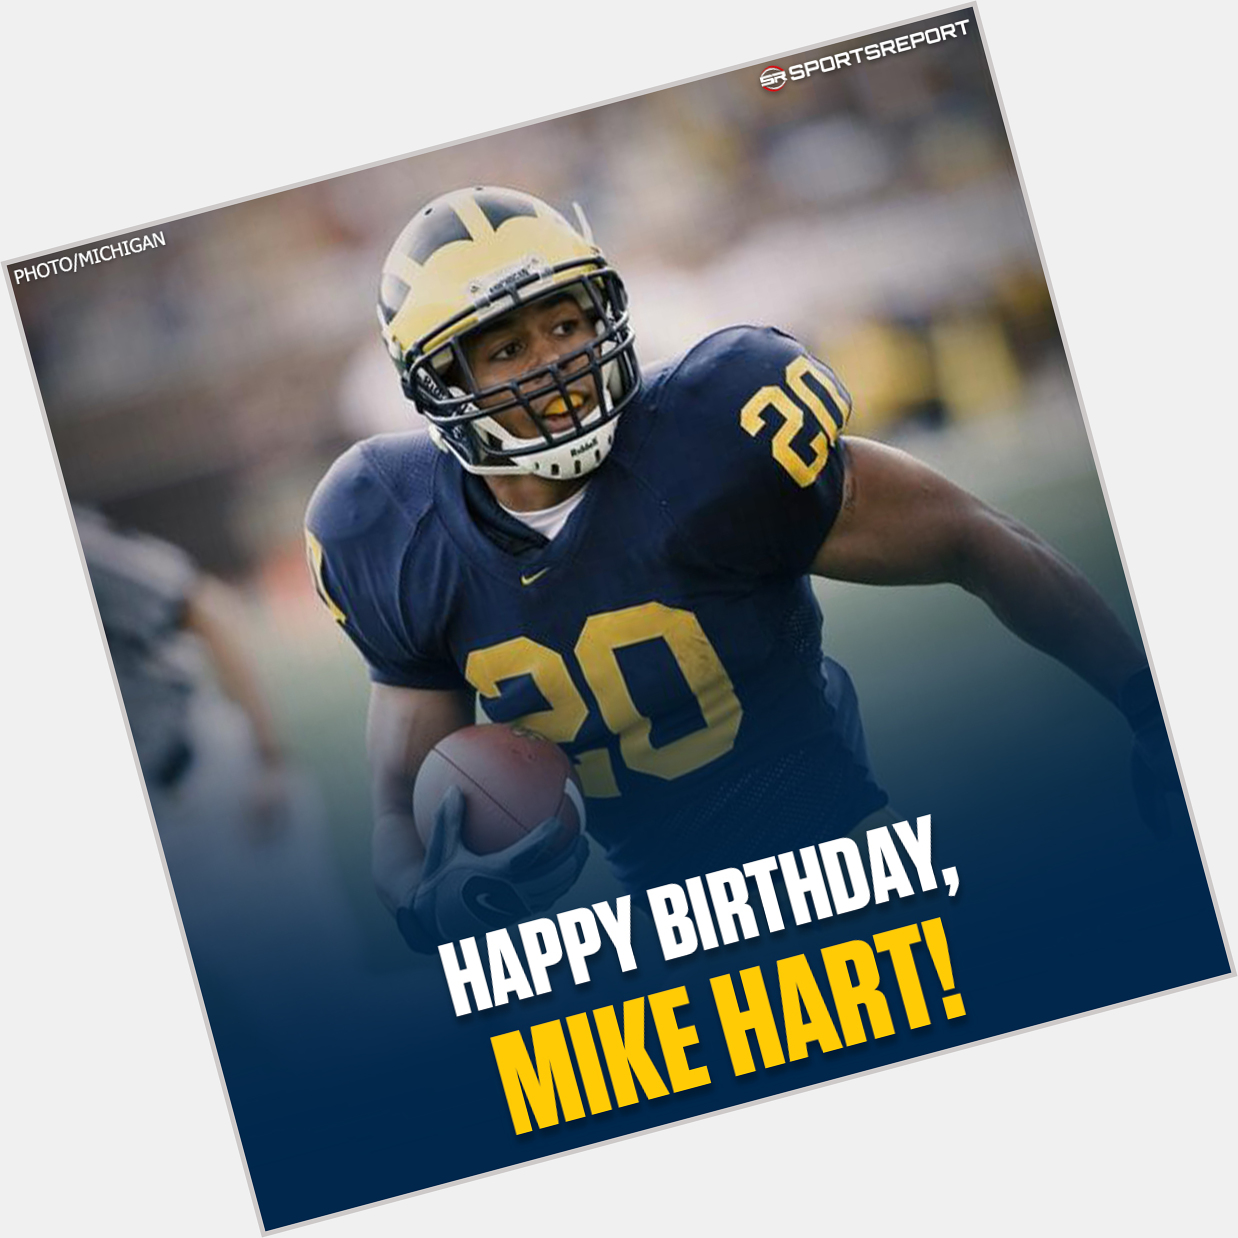 Happy Birthday to Legend, Mike Hart!  